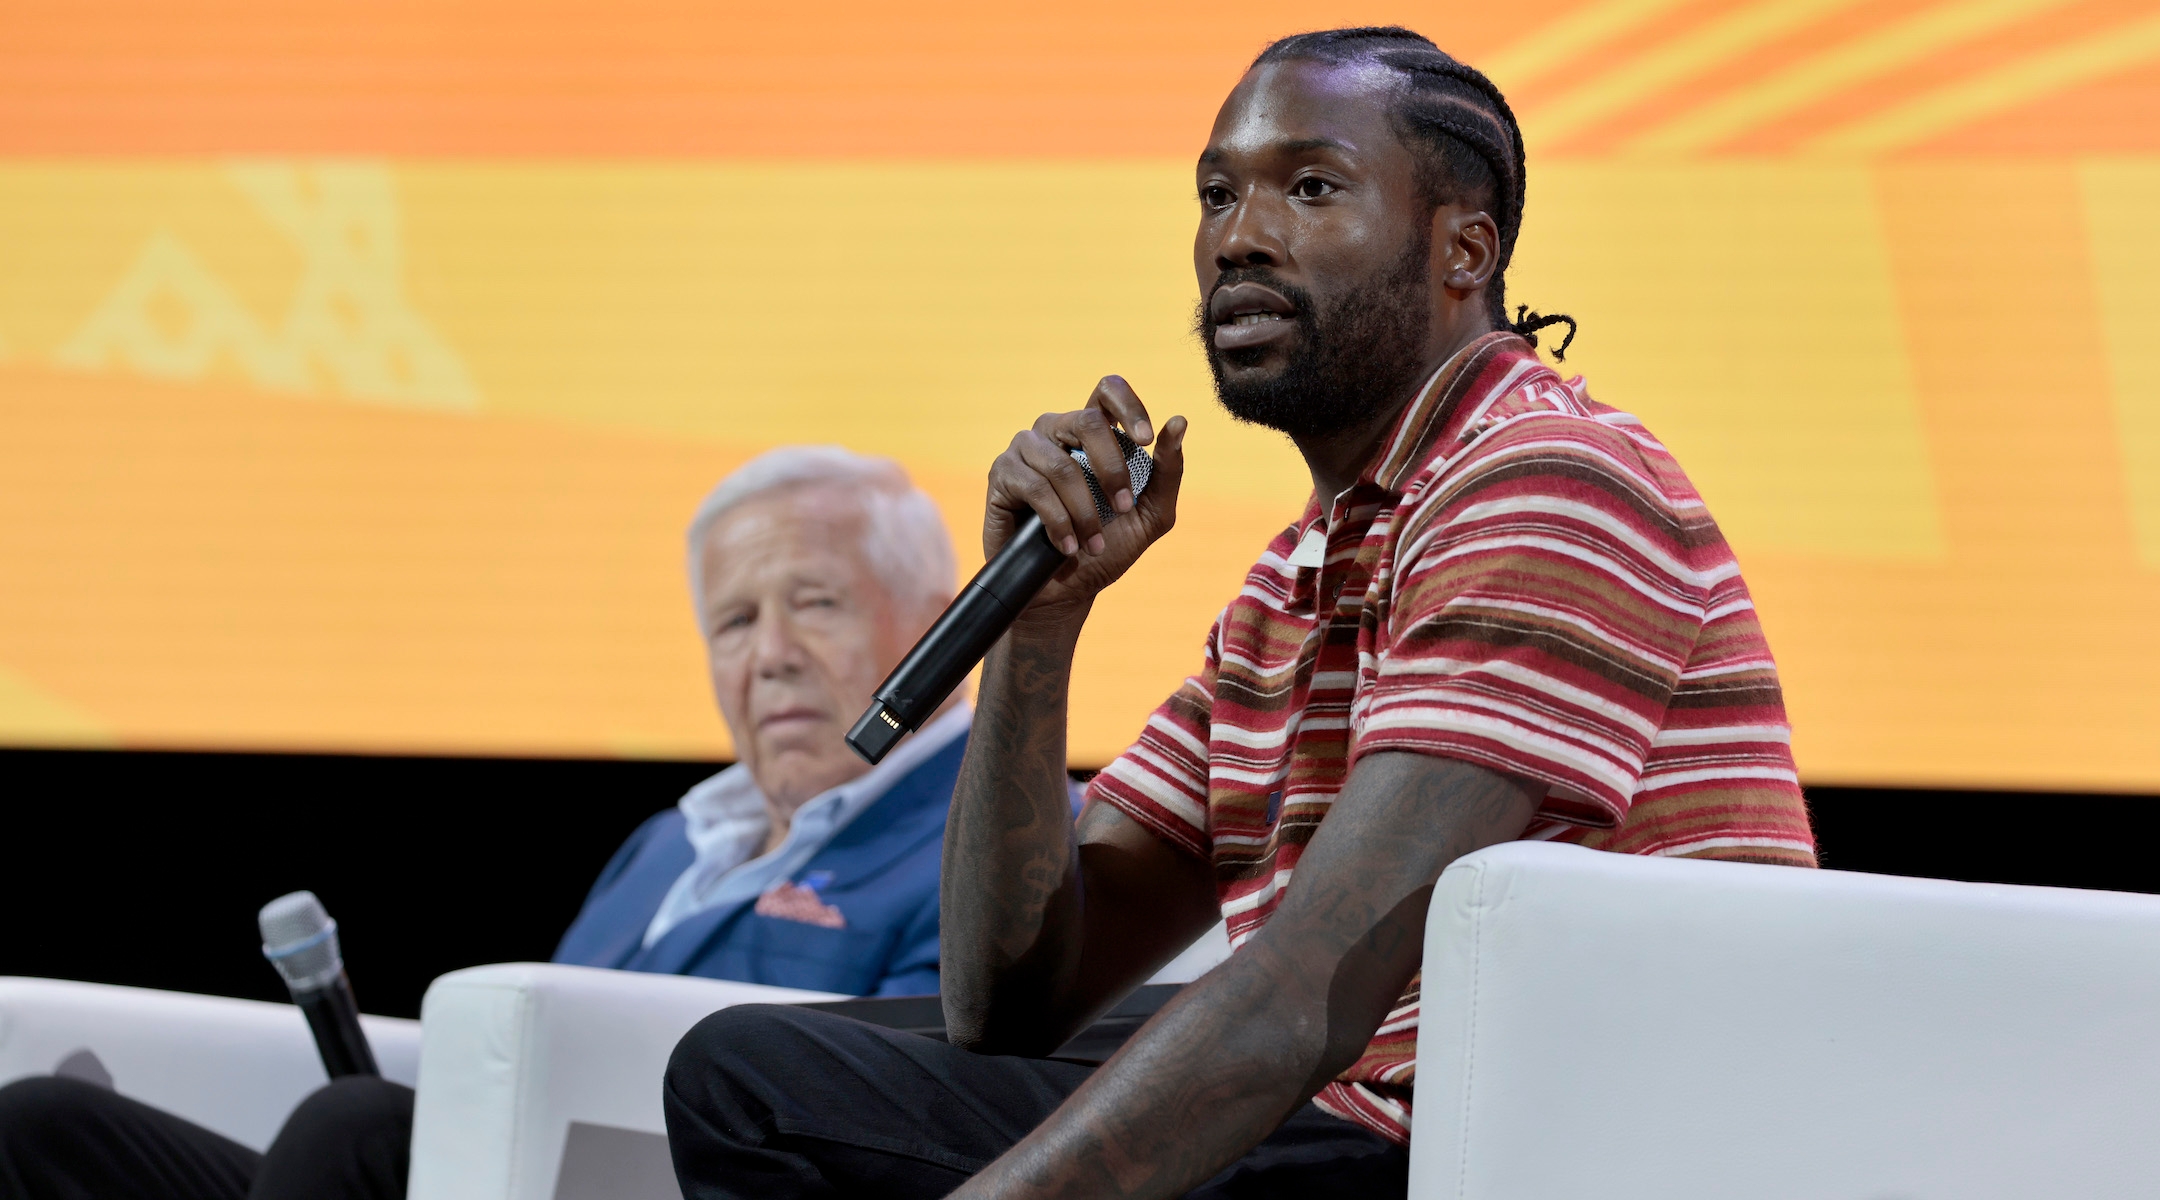 New England Patriots owner Robert Kraft, left, and rapper Meek Mill spoke on a panel about combating antisemitism and racism at the annual NAACP convention in Boston, July 30, 2023. (Pat Greenhouse/The Boston Globe via Getty Images)